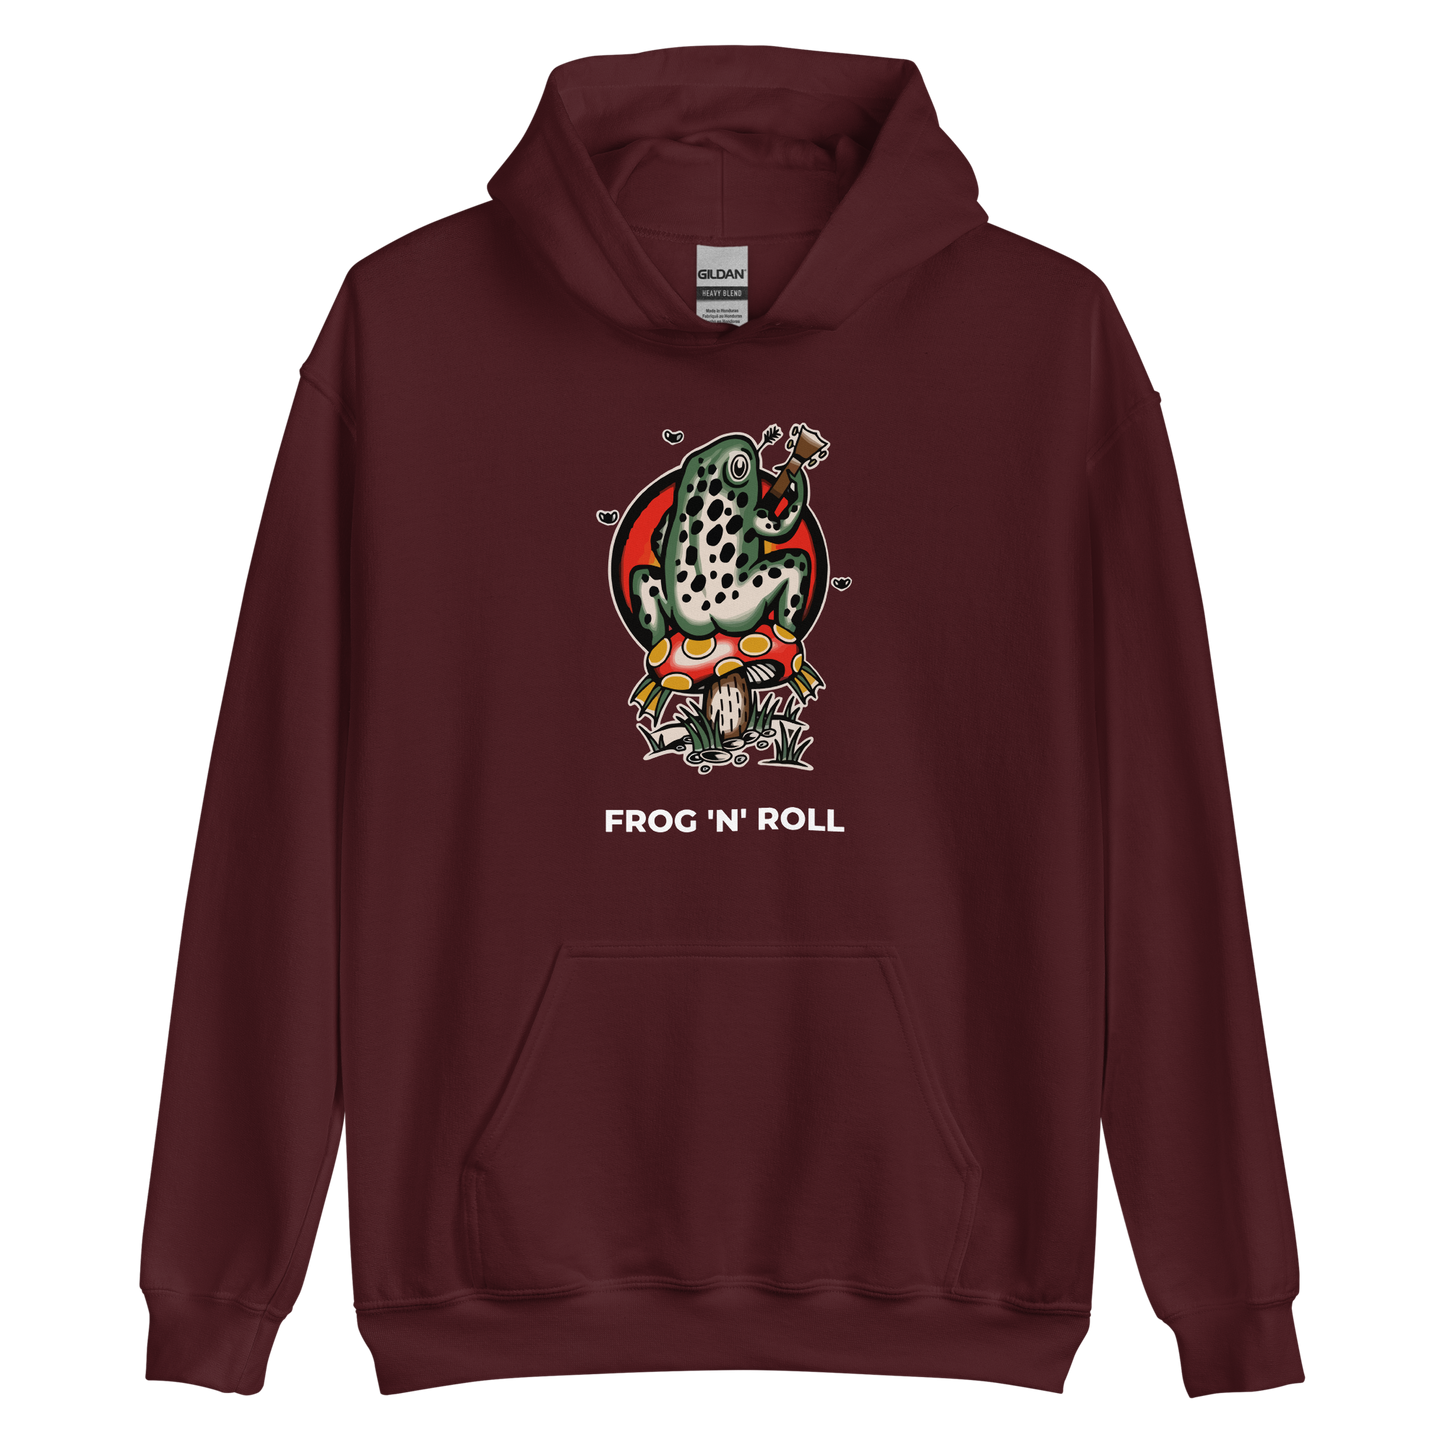 Maroon Frog Hoodie featuring the hilarious Frog 'n' Roll graphic on the chest - Funny Graphic Frog Hoodies - Boozy Fox